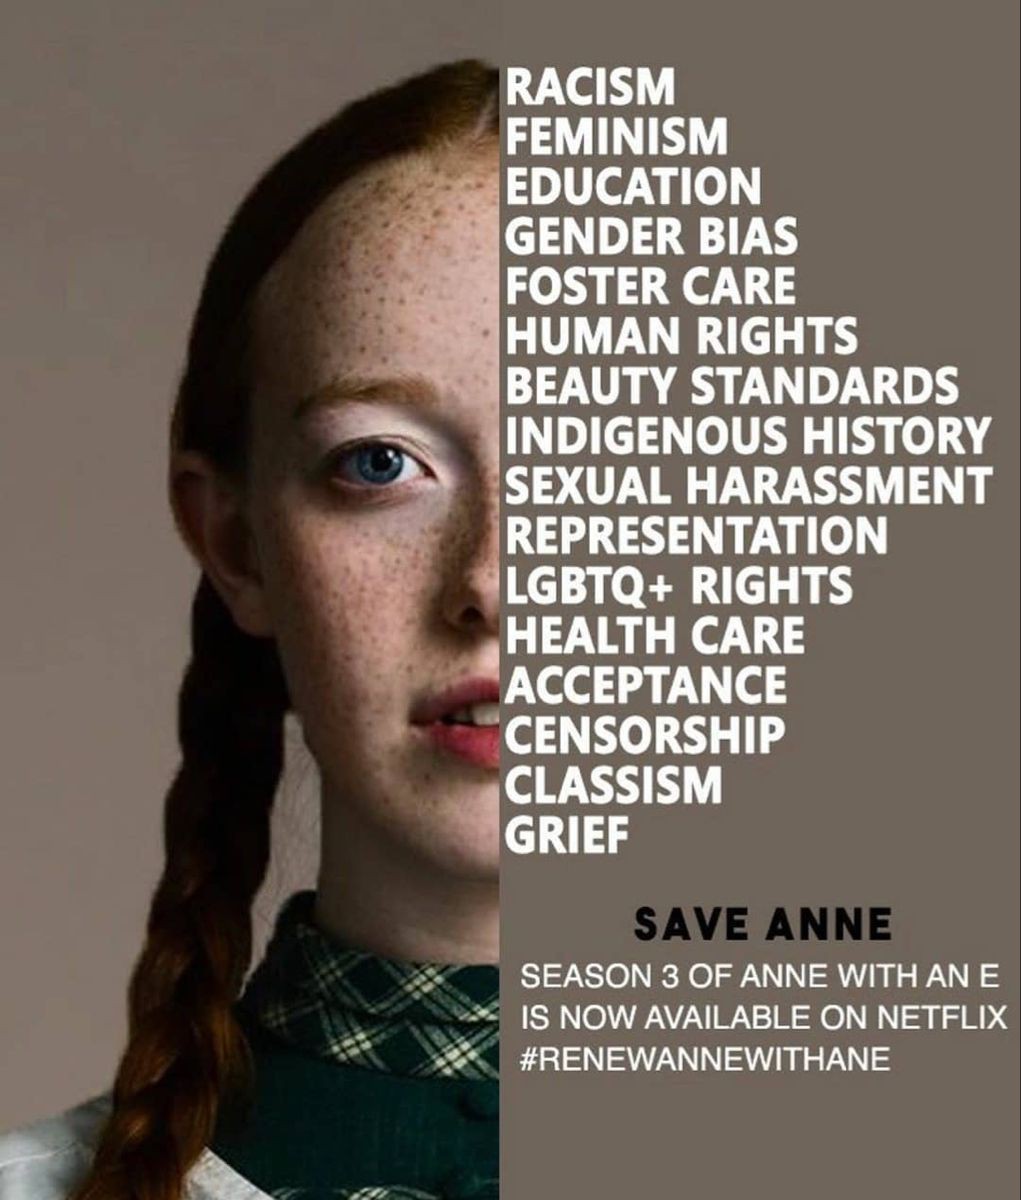 Anne With An E is not just a show.  #renewannewithaneُ #AnneWithAnE  #SaveAnneWithAnE  #AnneWithAnESeason4 NETFLIX ANNE 700K